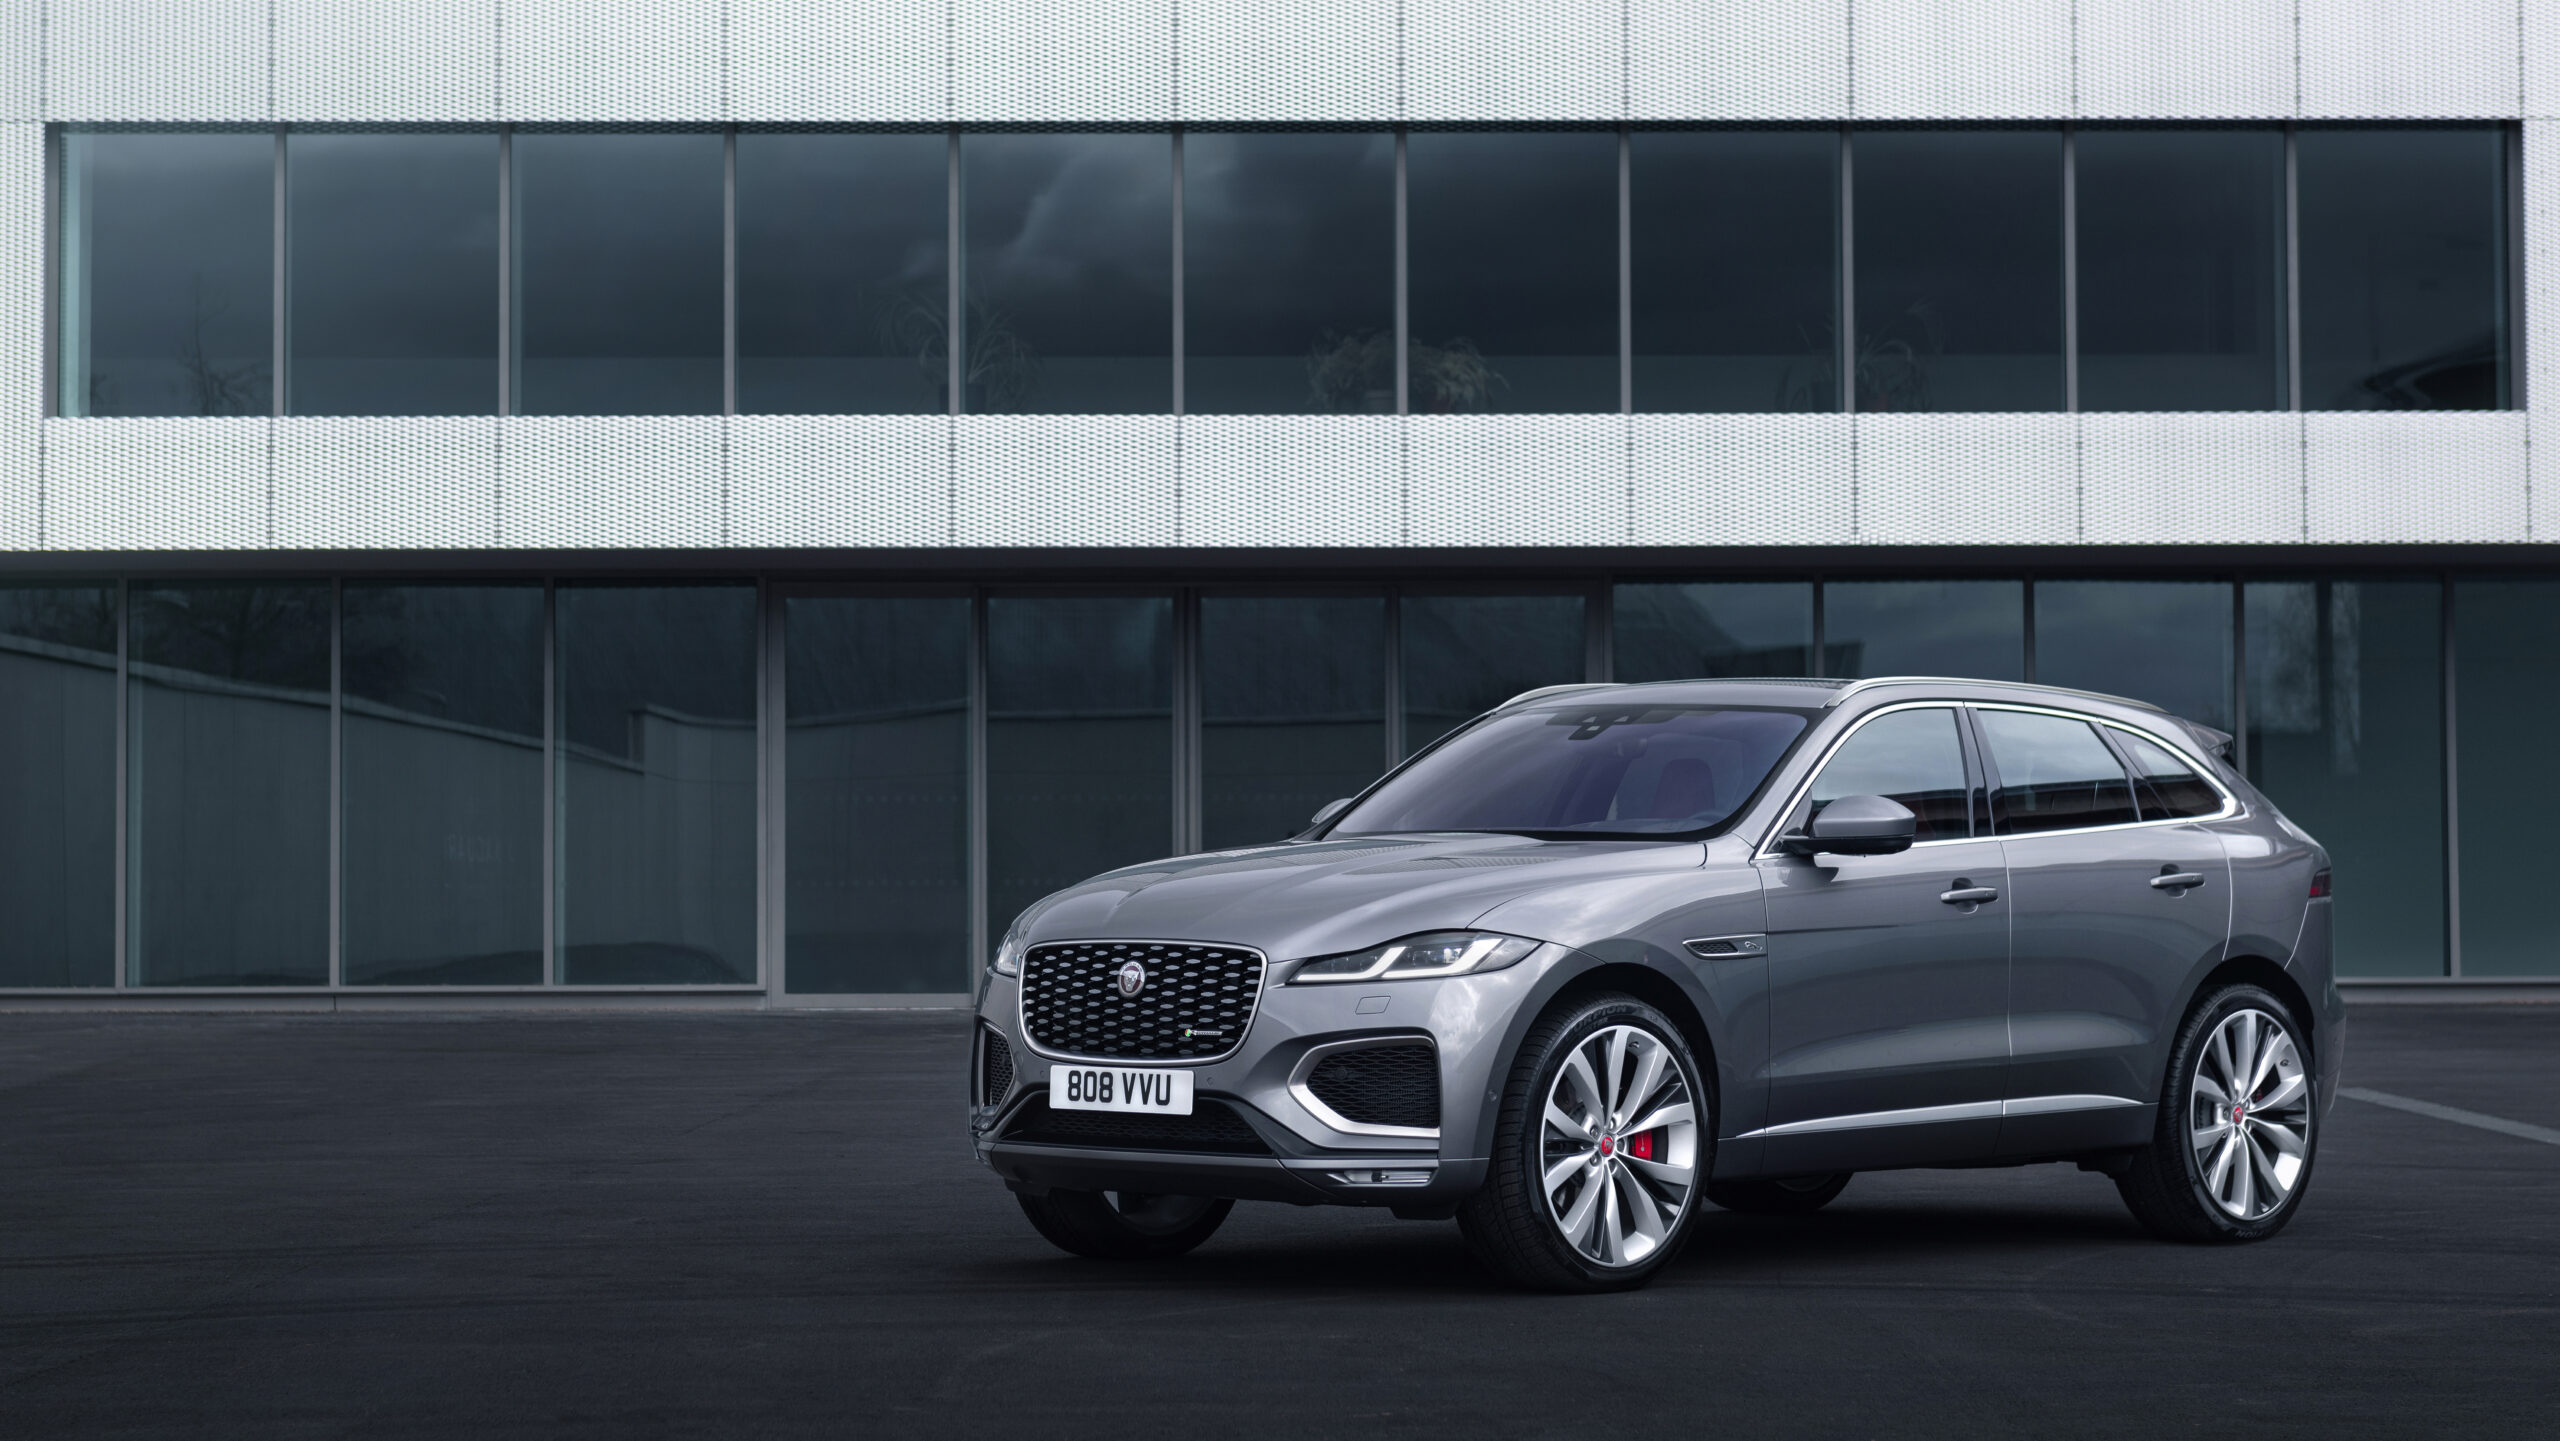 21 Jaguar F Pace Revealed Unmatched Attention To Detail The Indian Wire